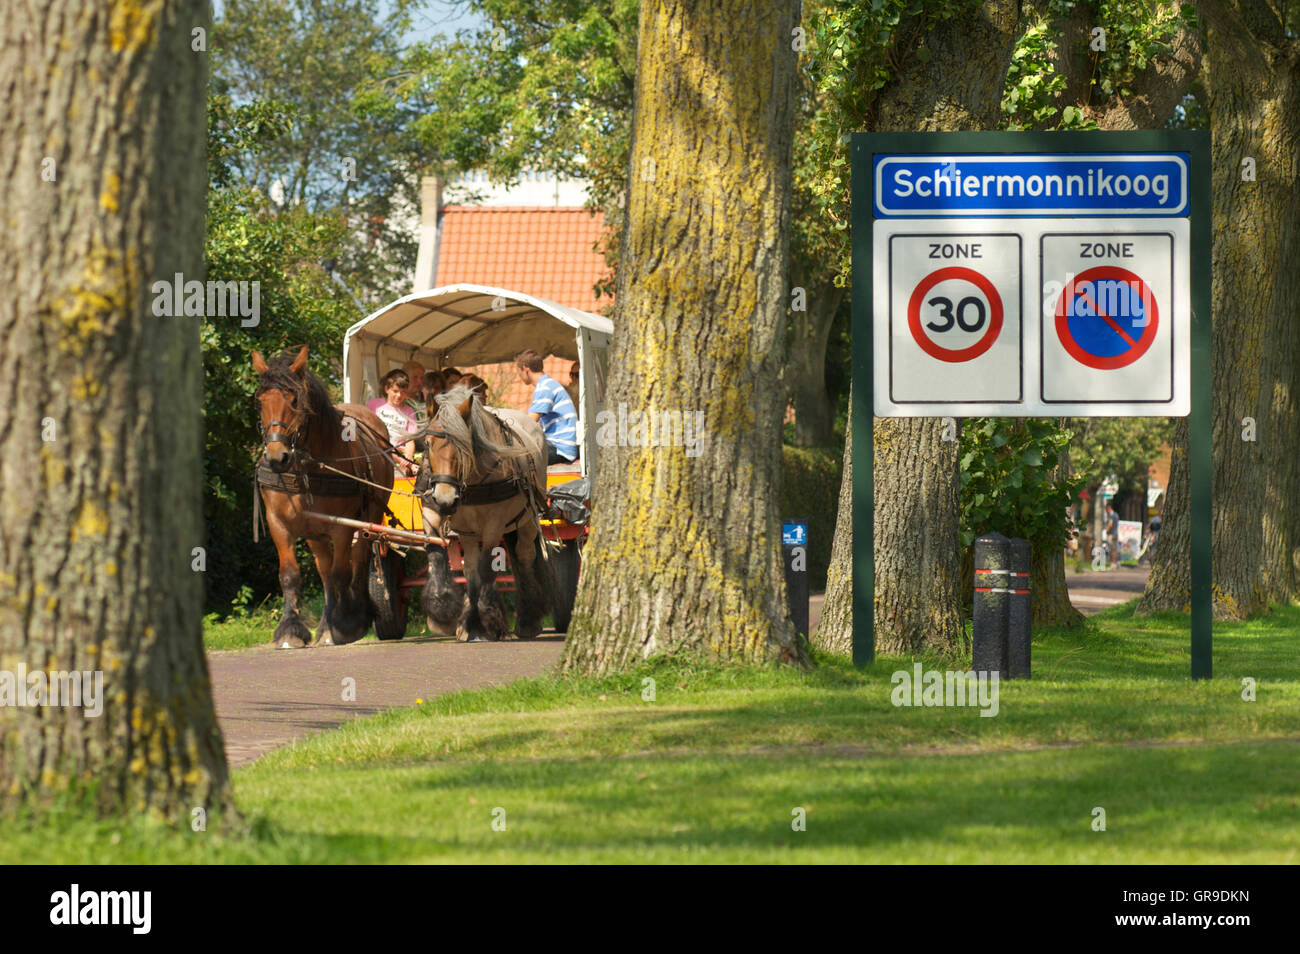 People celebrating together in a carriage with horses leaving the village of Schiermonnikoog on the island of Schiermonnikoog, the Netherlands Stock Photo